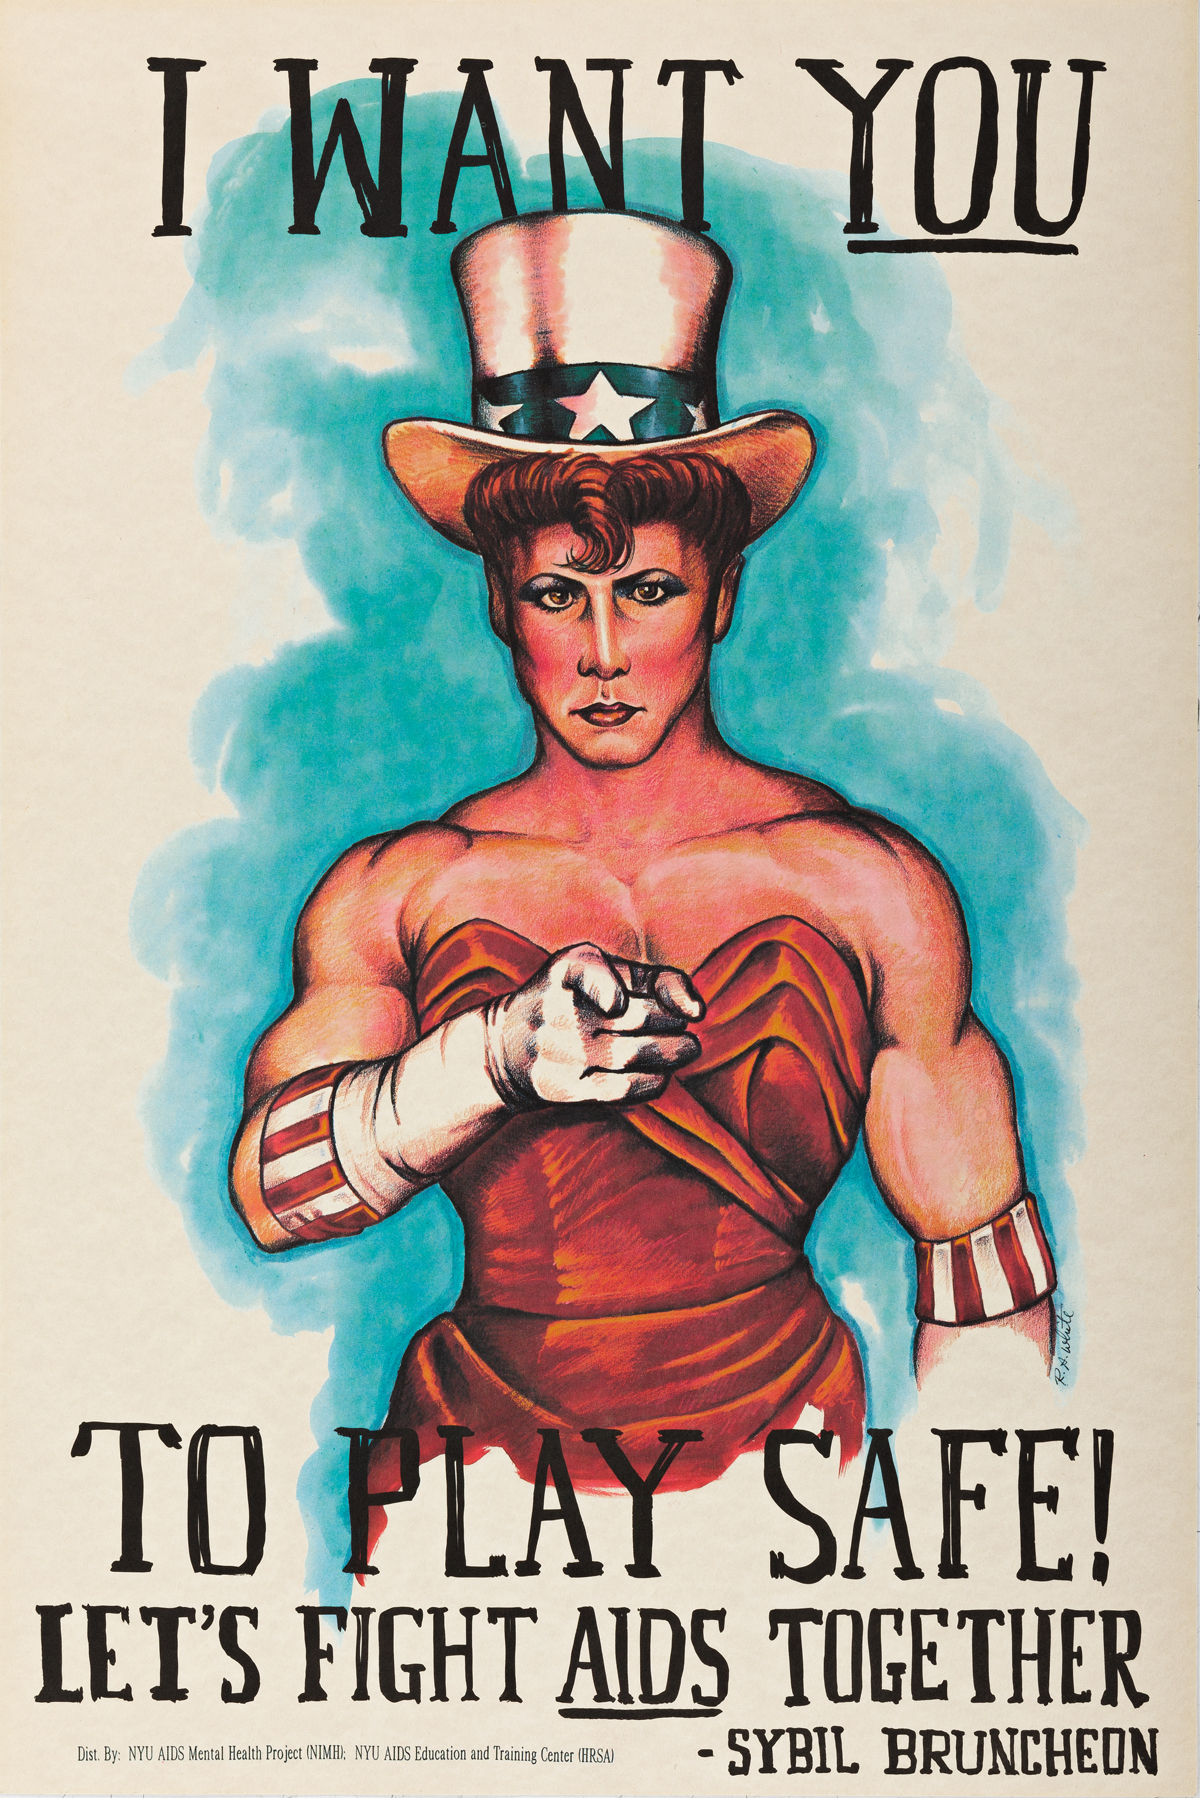 RICHARD ALLAN WHITE (Dates Unknown) I Want You To Play Safe! Lets Fight AIDS Together.